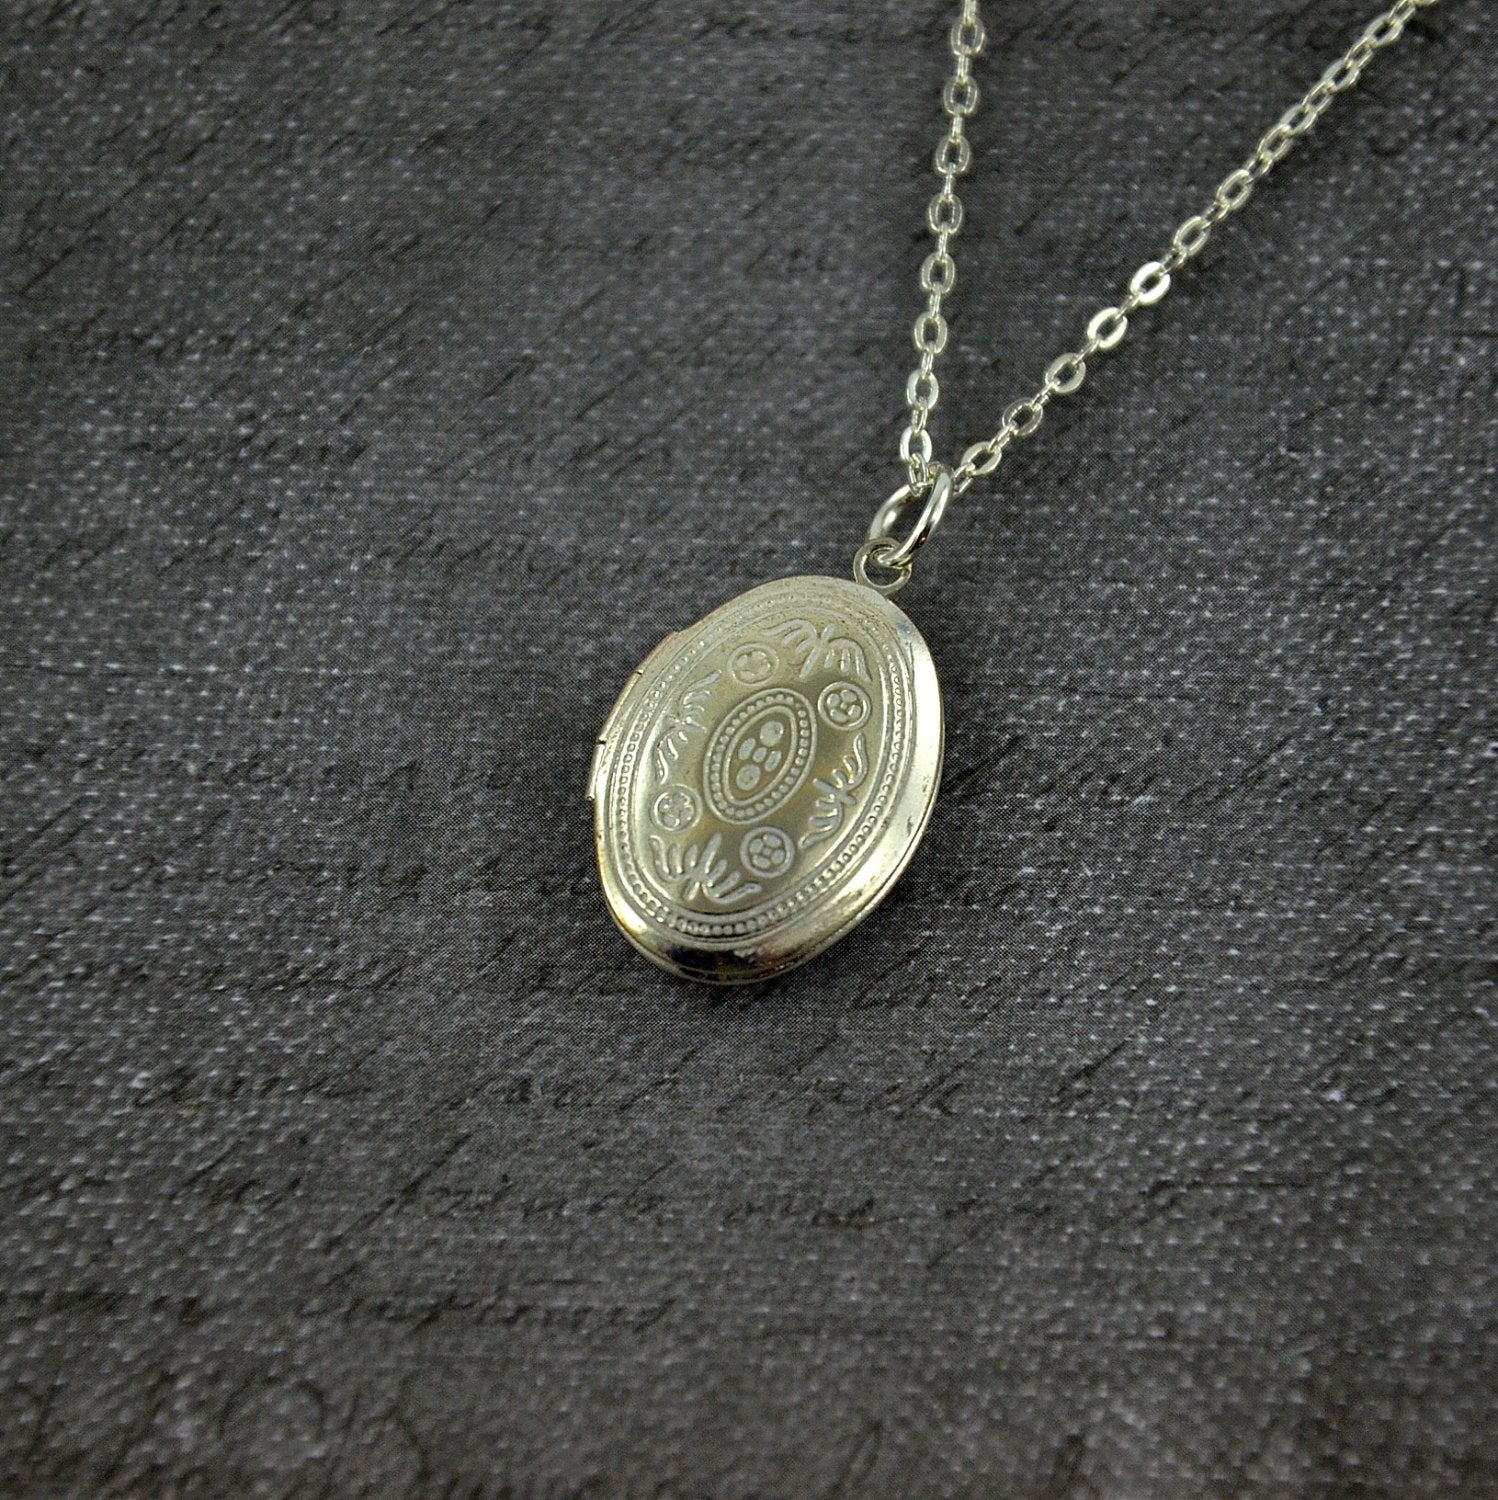 Small White Ornate Locket Necklace -  Oval White Pendant Delicate - Simple and Long Fashion - Gwen Delicious Jewelry Designs